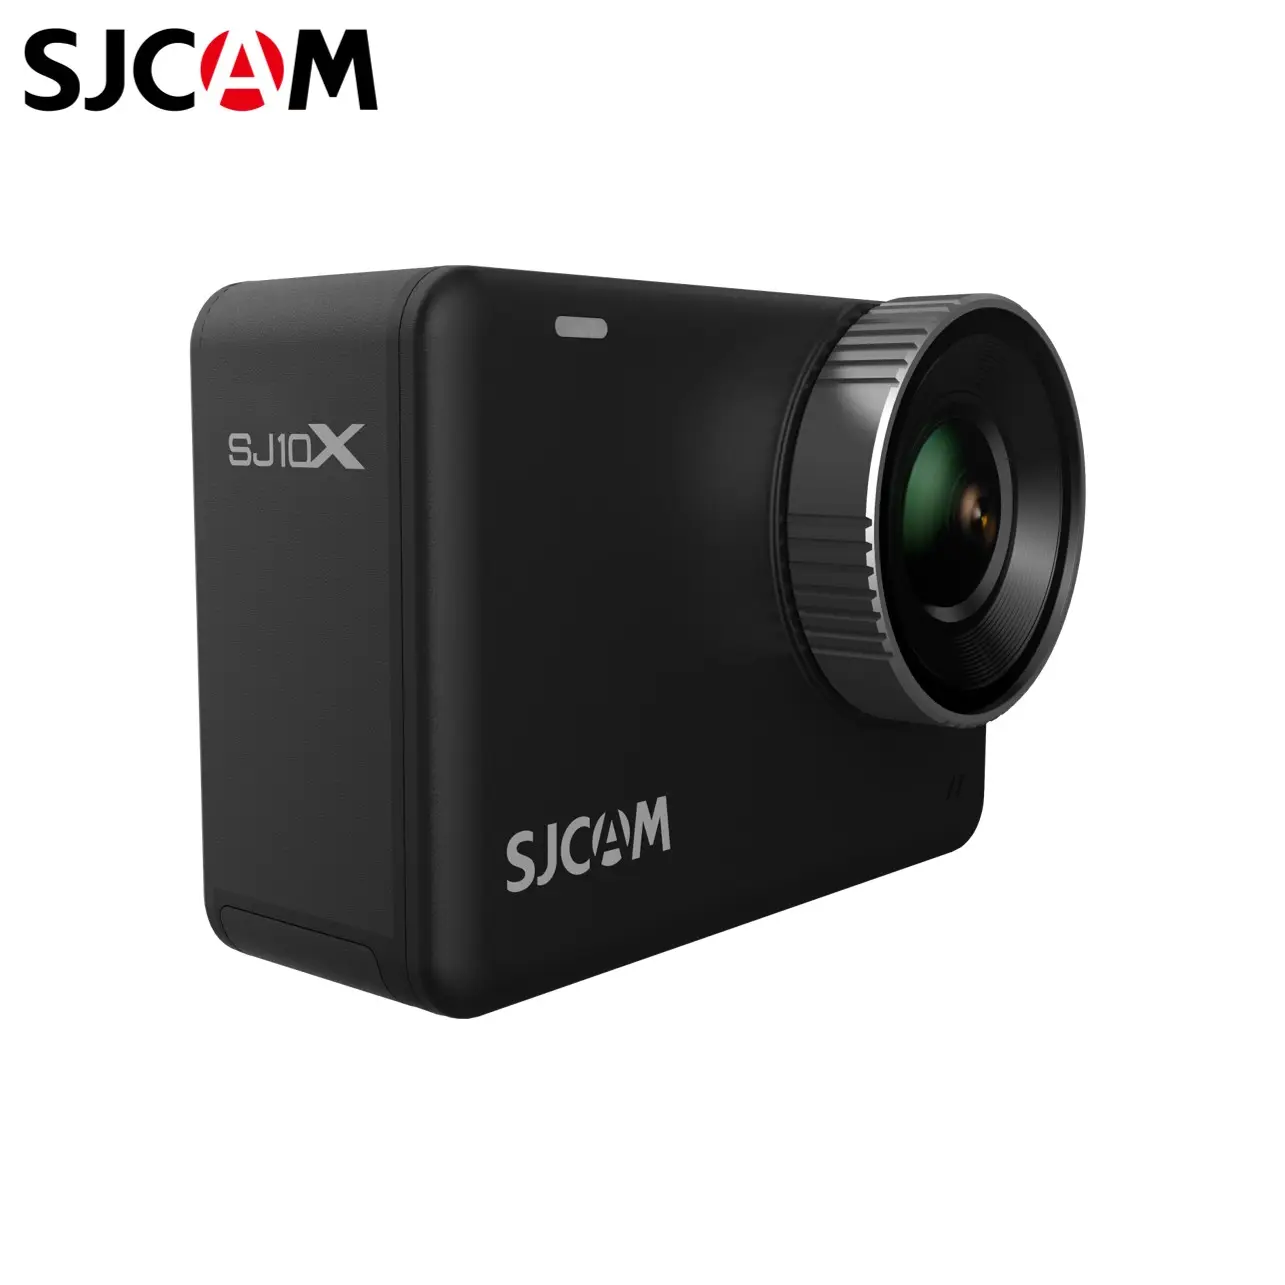 SJ10 PRO SJCAM 4K 60FPS Wifi Action Camera 10M Body Waterproof Sports Camera 2.33" Touch Screen Camera for Extreme Sports